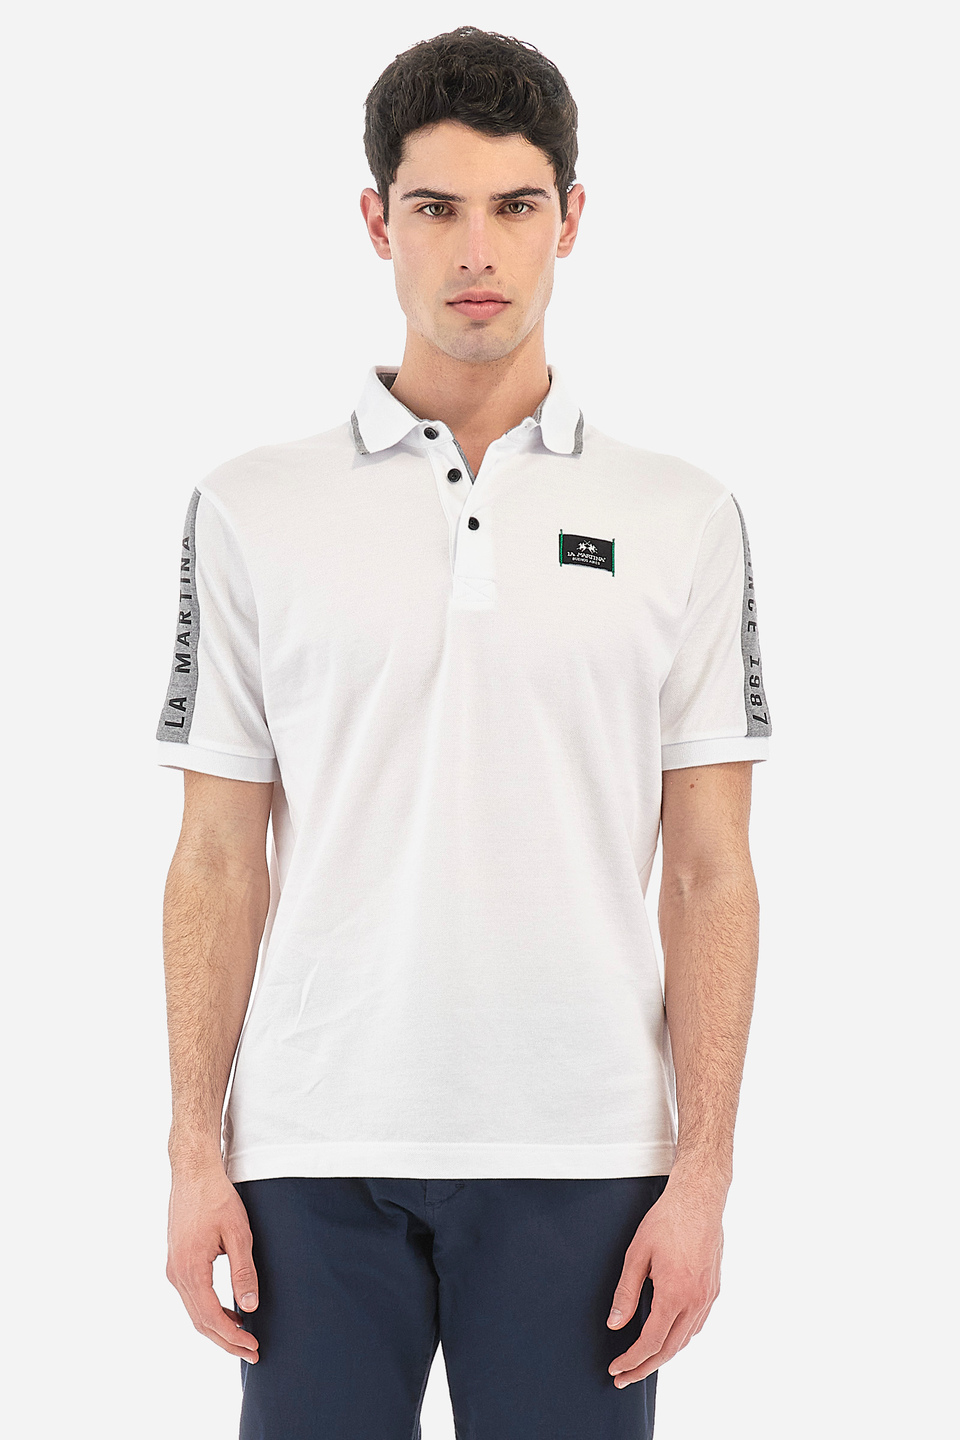 Men's short-sleeved polo shirt Logos maxi stylized logo in solid color - Velyo | La Martina - Official Online Shop